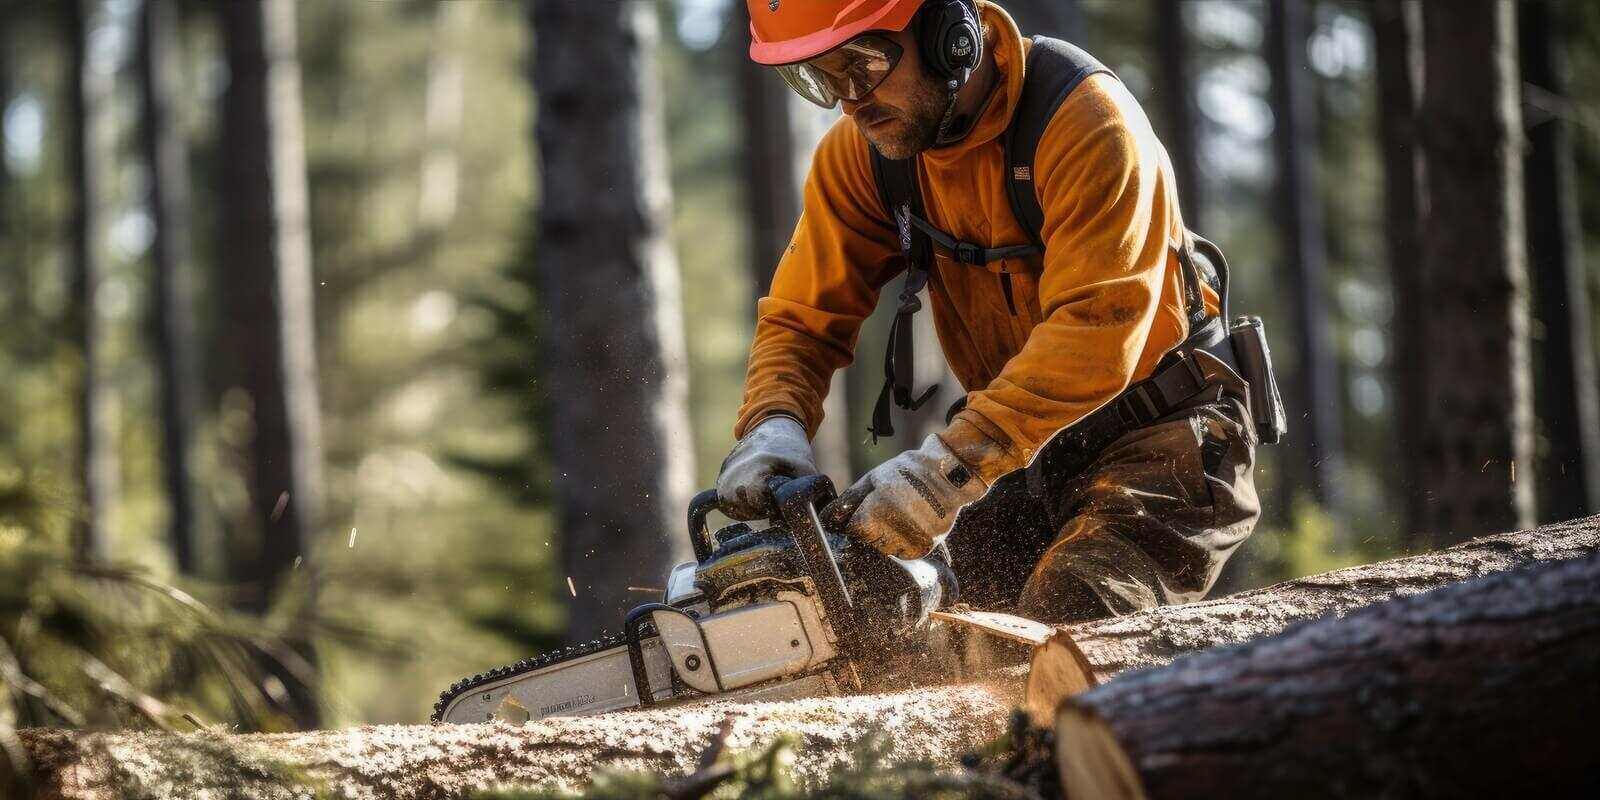 woodcutter saws wood in the amazing forest with a chainsaw